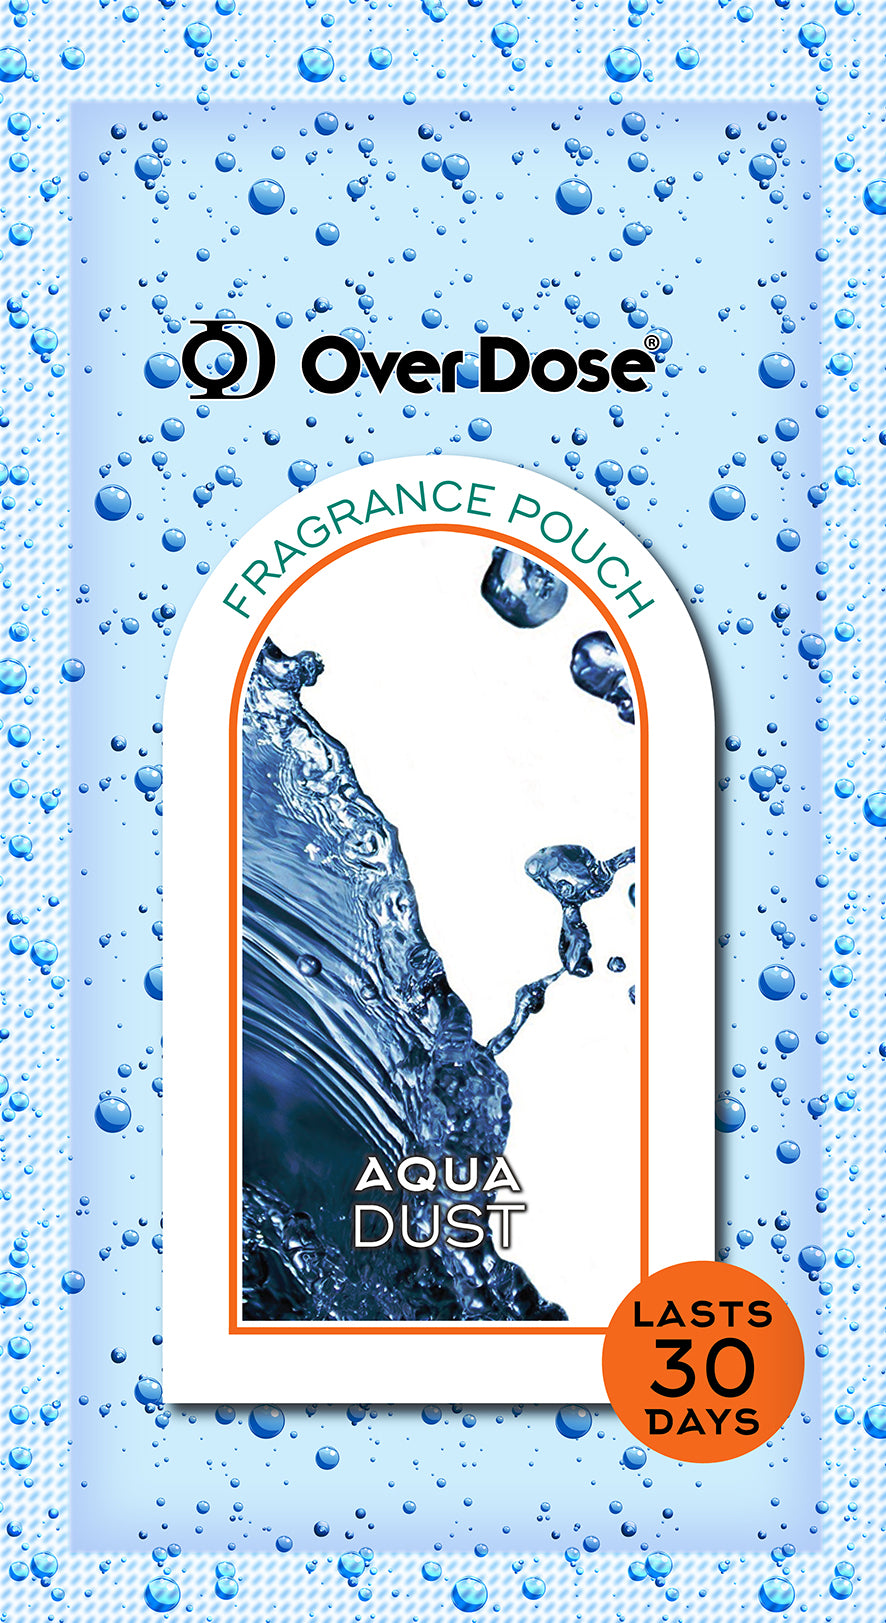 Over Dose Aqua Dust Fragrance Pouch